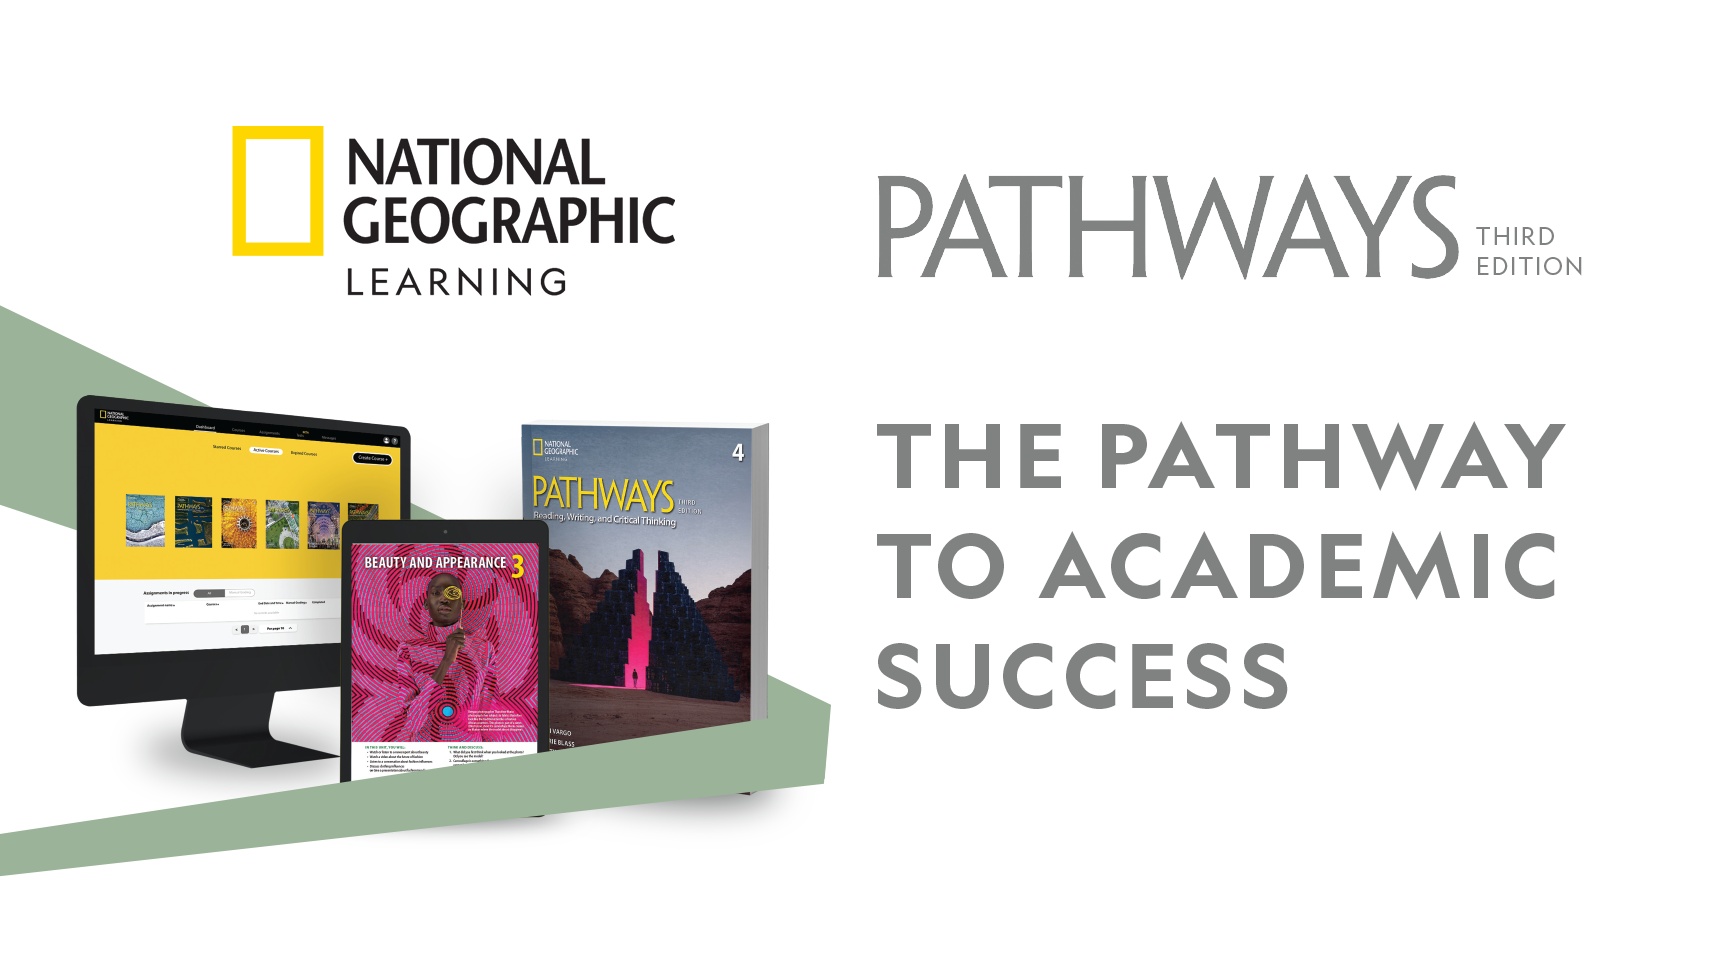 Pathways is a best-selling, five-level academic skills series that combines highly visual, real-world content and rigorous language instruction to help students develop the skills, language, and critical thinking they need for academic success. Exploring academic topics through authentic listenings, videos, photos, and infographics, students connect to ideas while building academic competence skills such as collaboration, communication, and problem-solving.  Pathways helps students to improve the academic and interpersonal skills needed to succeed in and out of the classroom. 